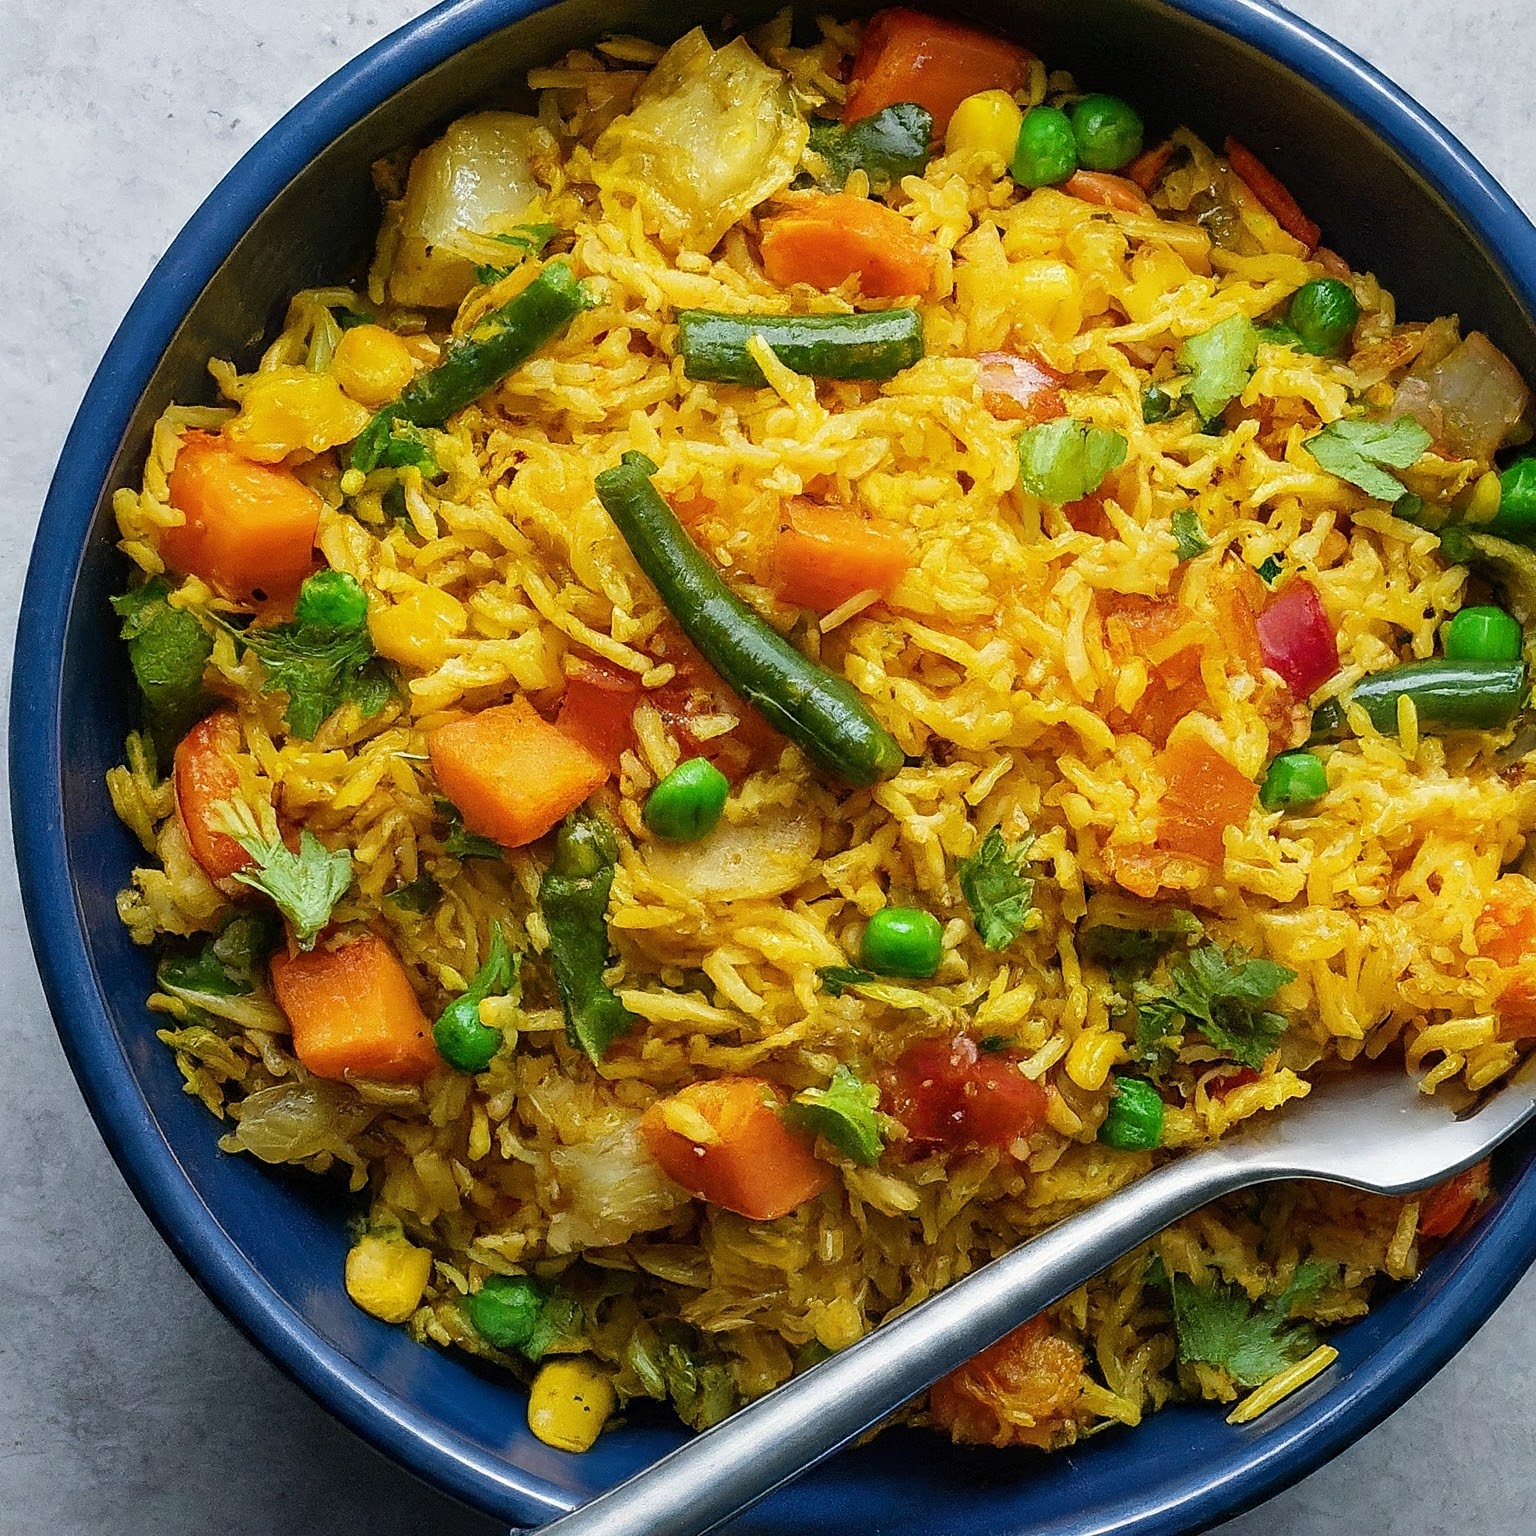 Instant Pot Vegetable Pulao with colourful vegetables and fluffy basmati rice